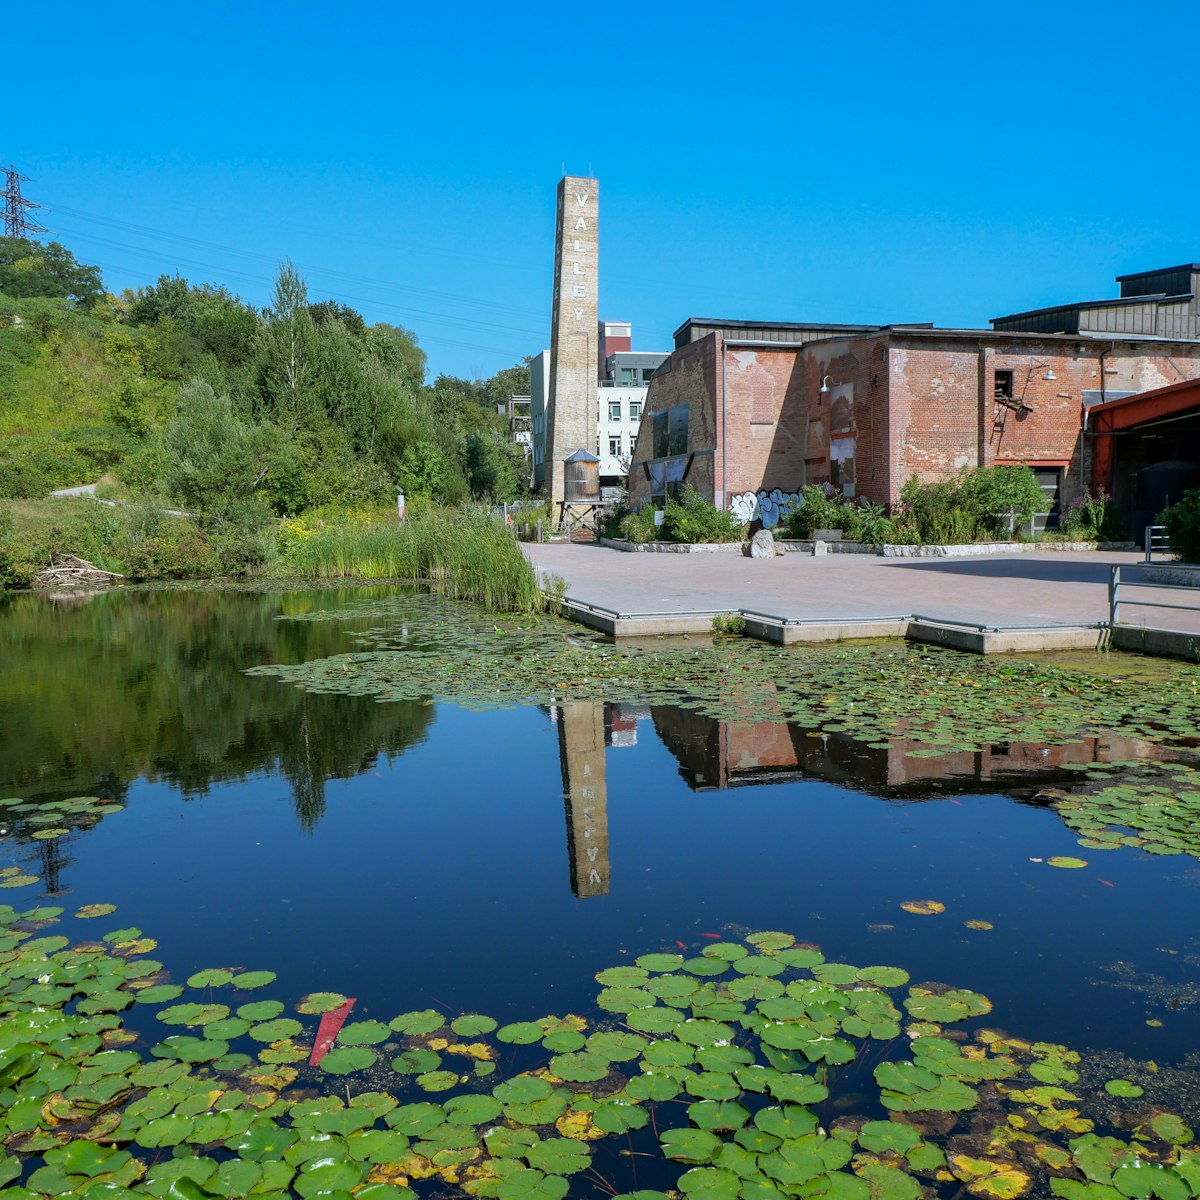 Toronto, Canada - August 24 2021:  Evergreen Brick Works in the Don Valley, a brick factory from the 19th century preserved as a park and museum
1452380964
evergreen brick works, path, don valley